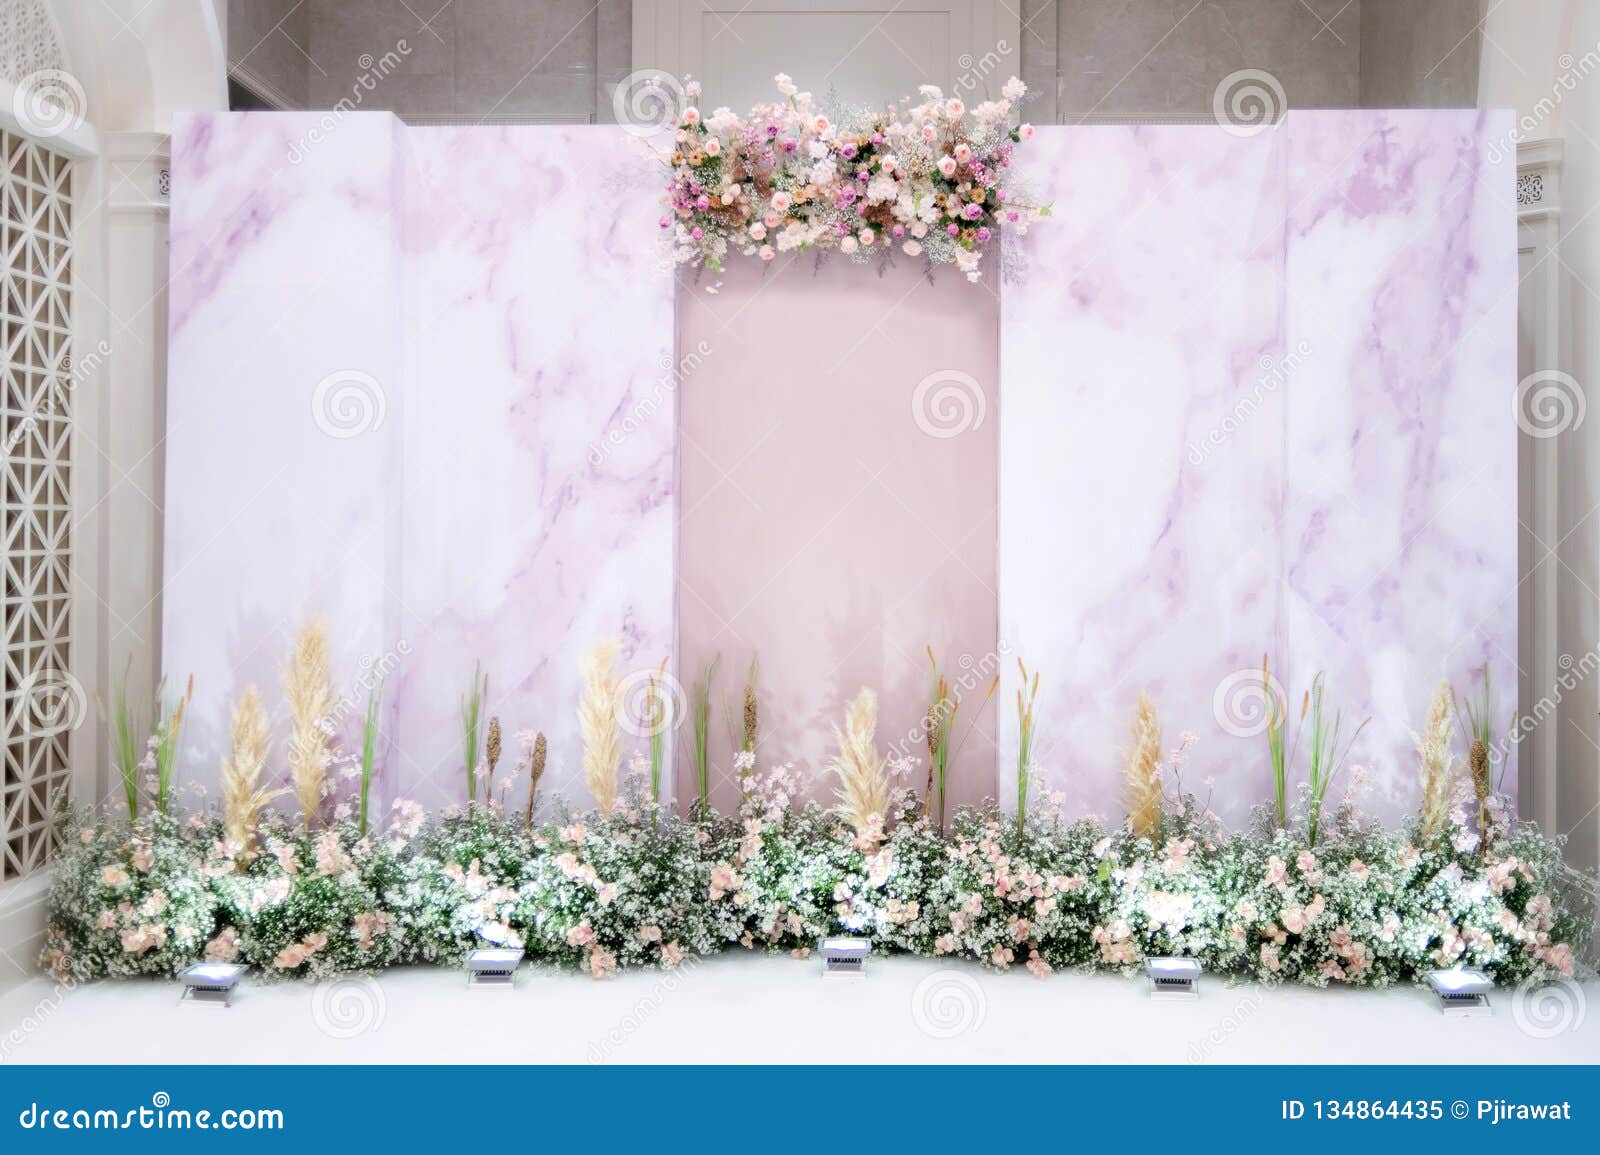 Wedding Backdrop with Flower Stock Image - Image of marriage, rose:  134864435